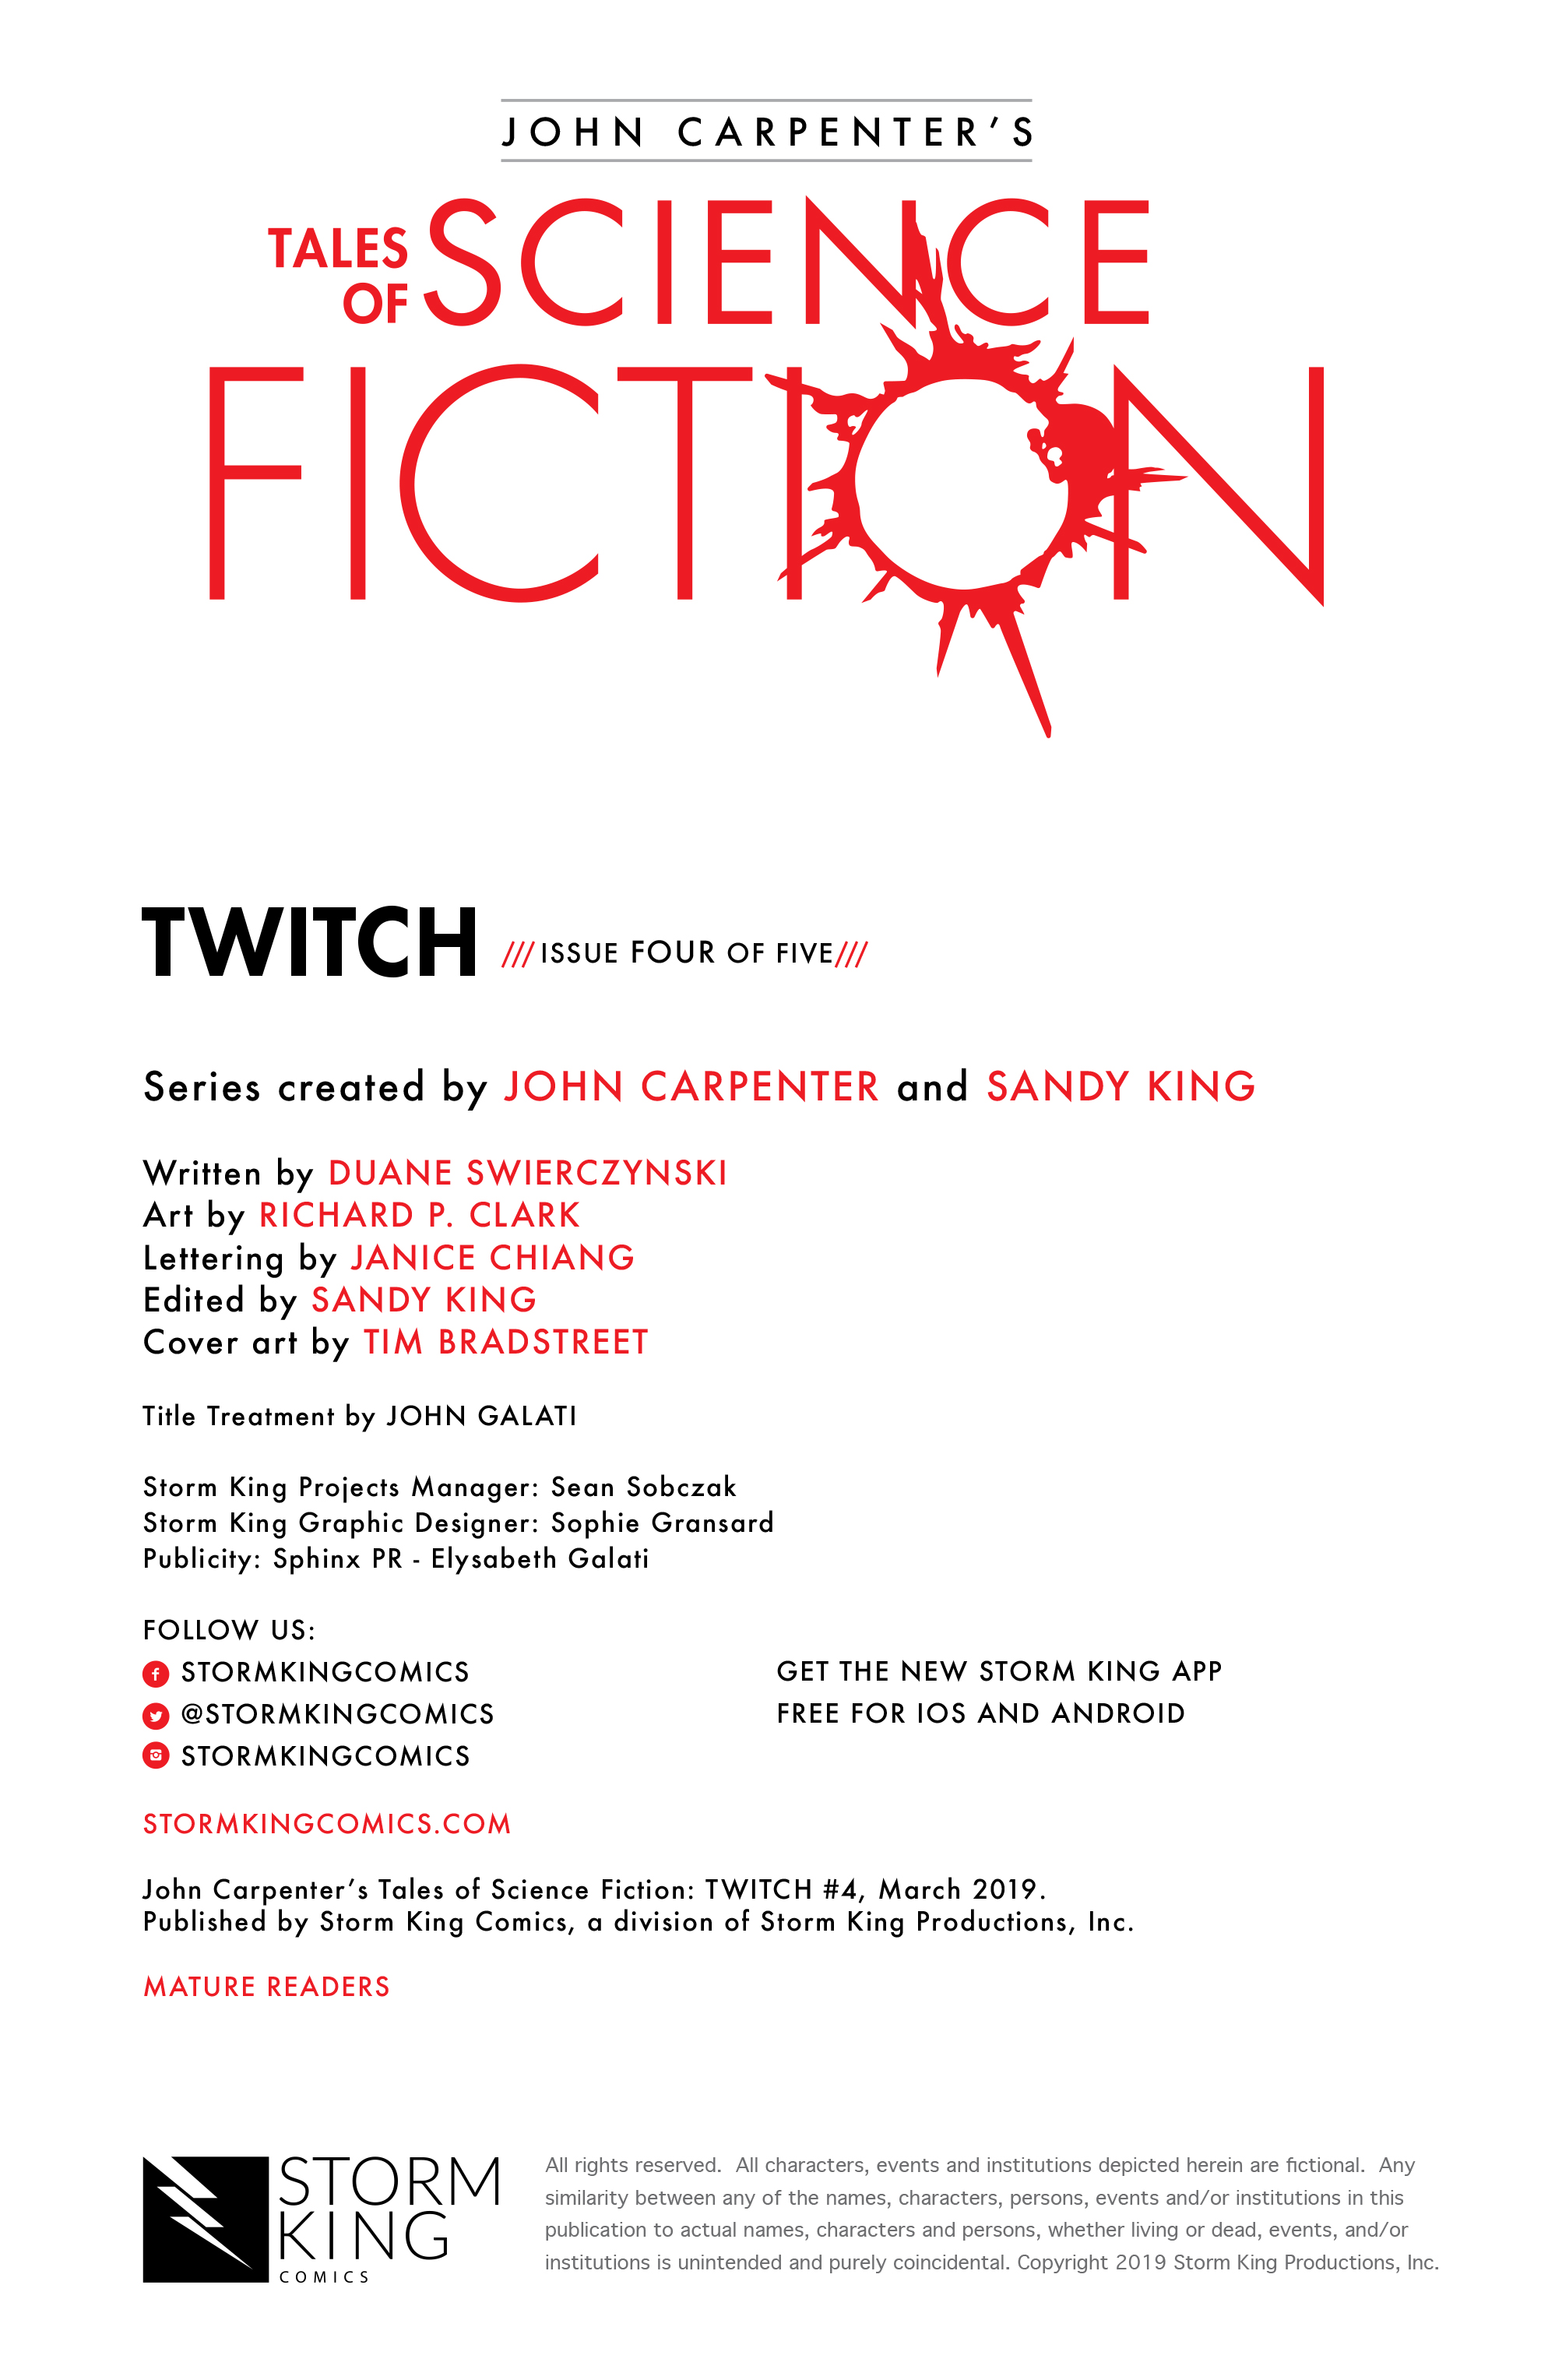 Read online John Carpenter's Tales of Science Fiction: Twitch comic -  Issue #4 - 2